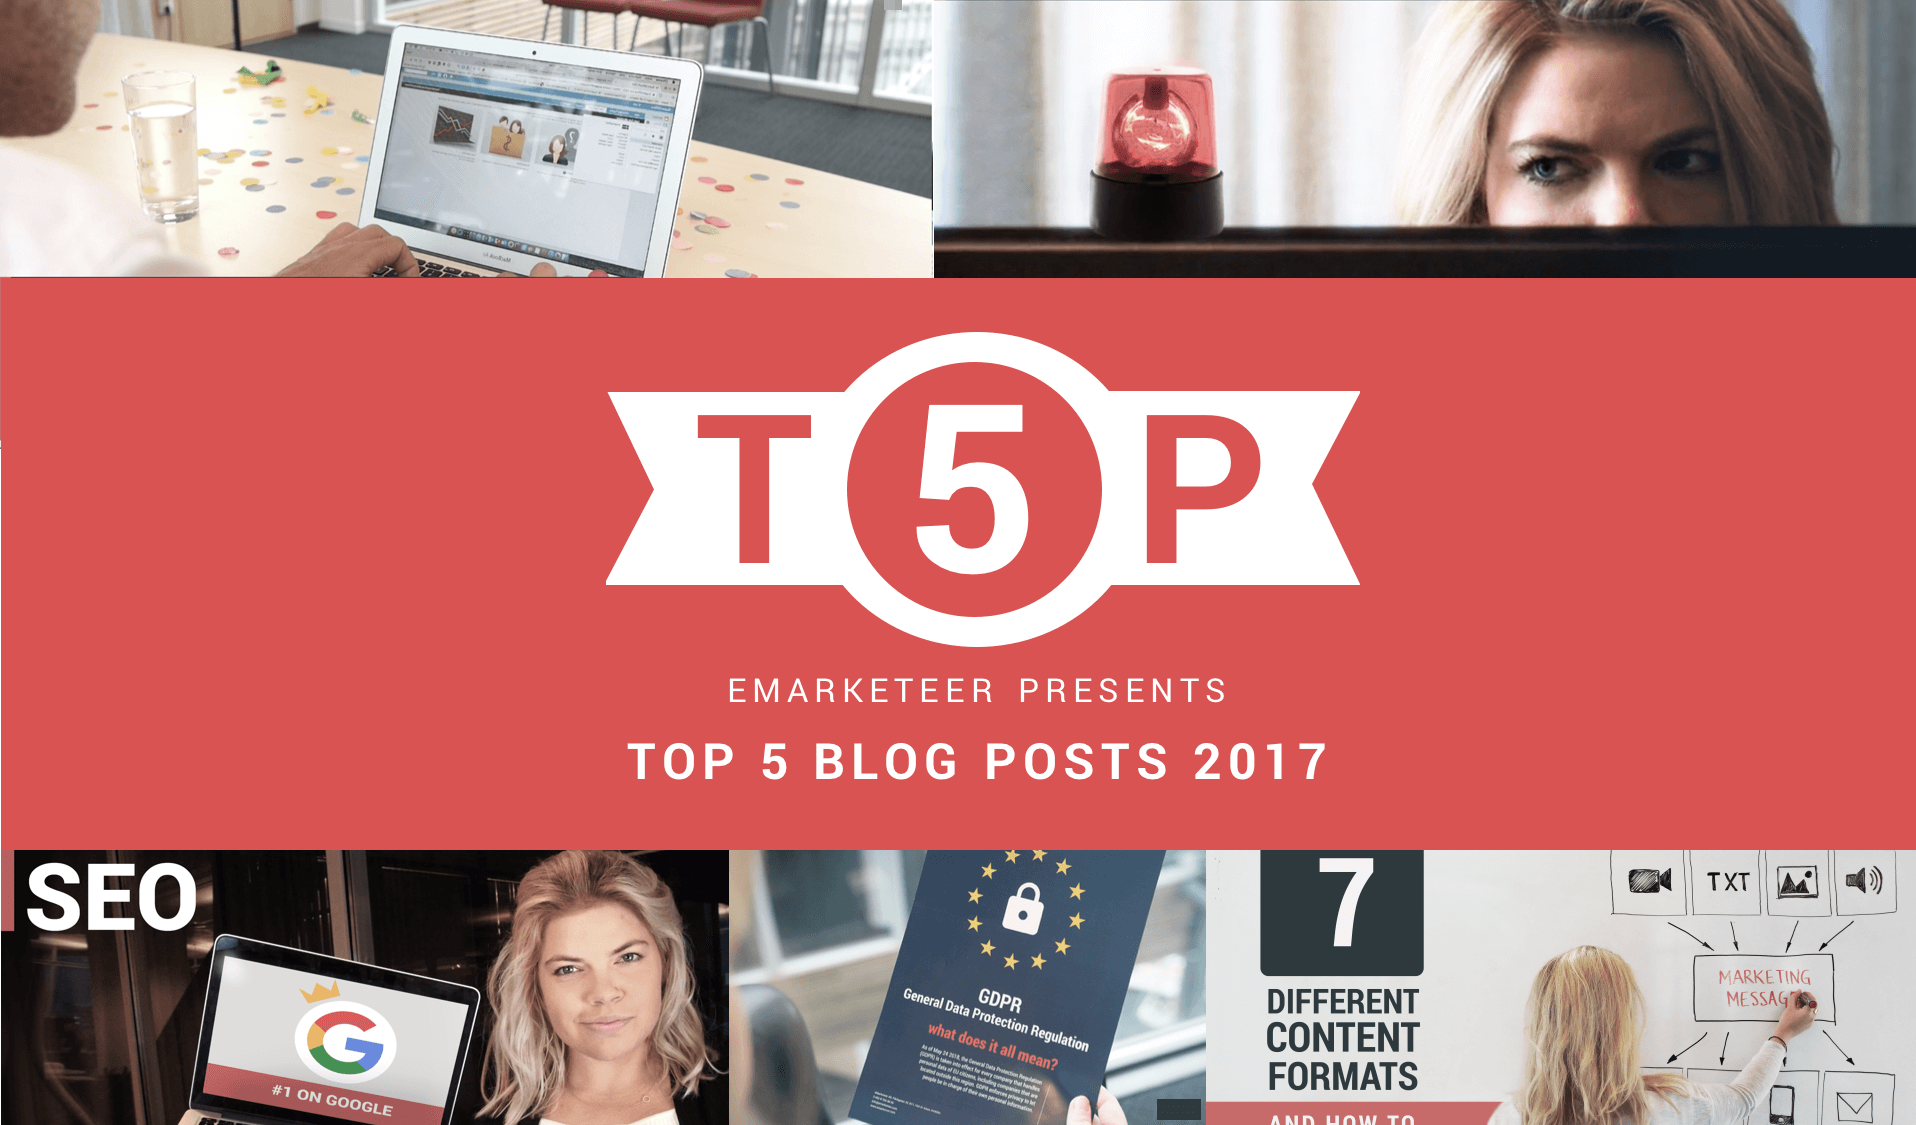 Feature image to blog post on best marketing advice from 2017